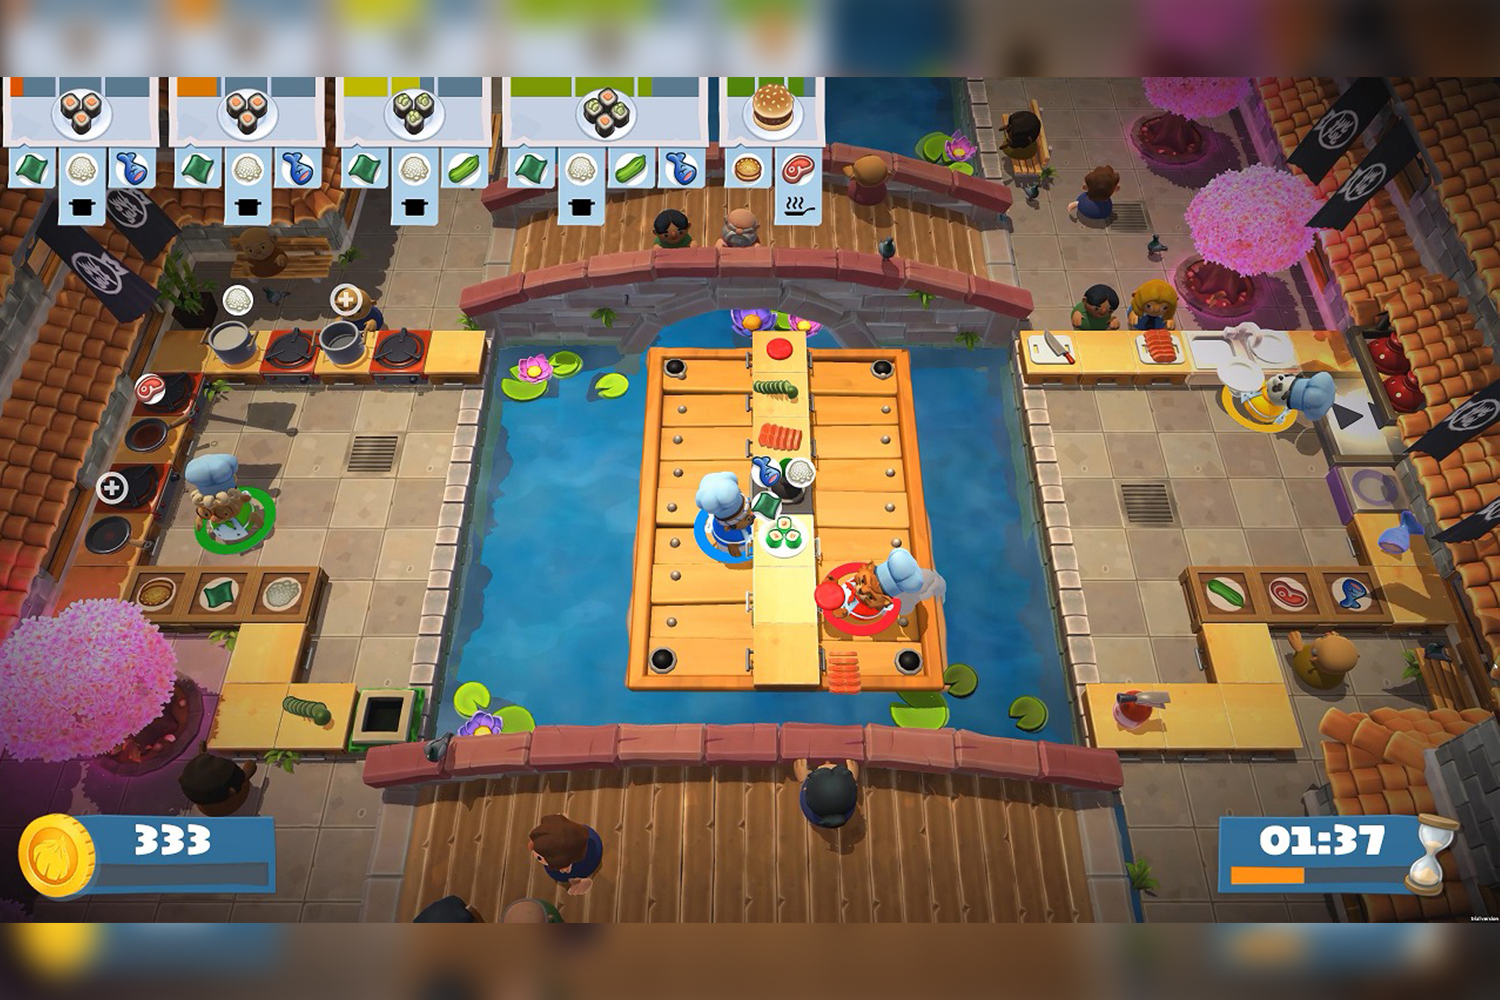 Gse Game Source Entertainment 家庭用ゲーム 発売元 Ps4用 Overcooked2 オーバークック2 パッケージ版が3月14日発売 初回特典付き